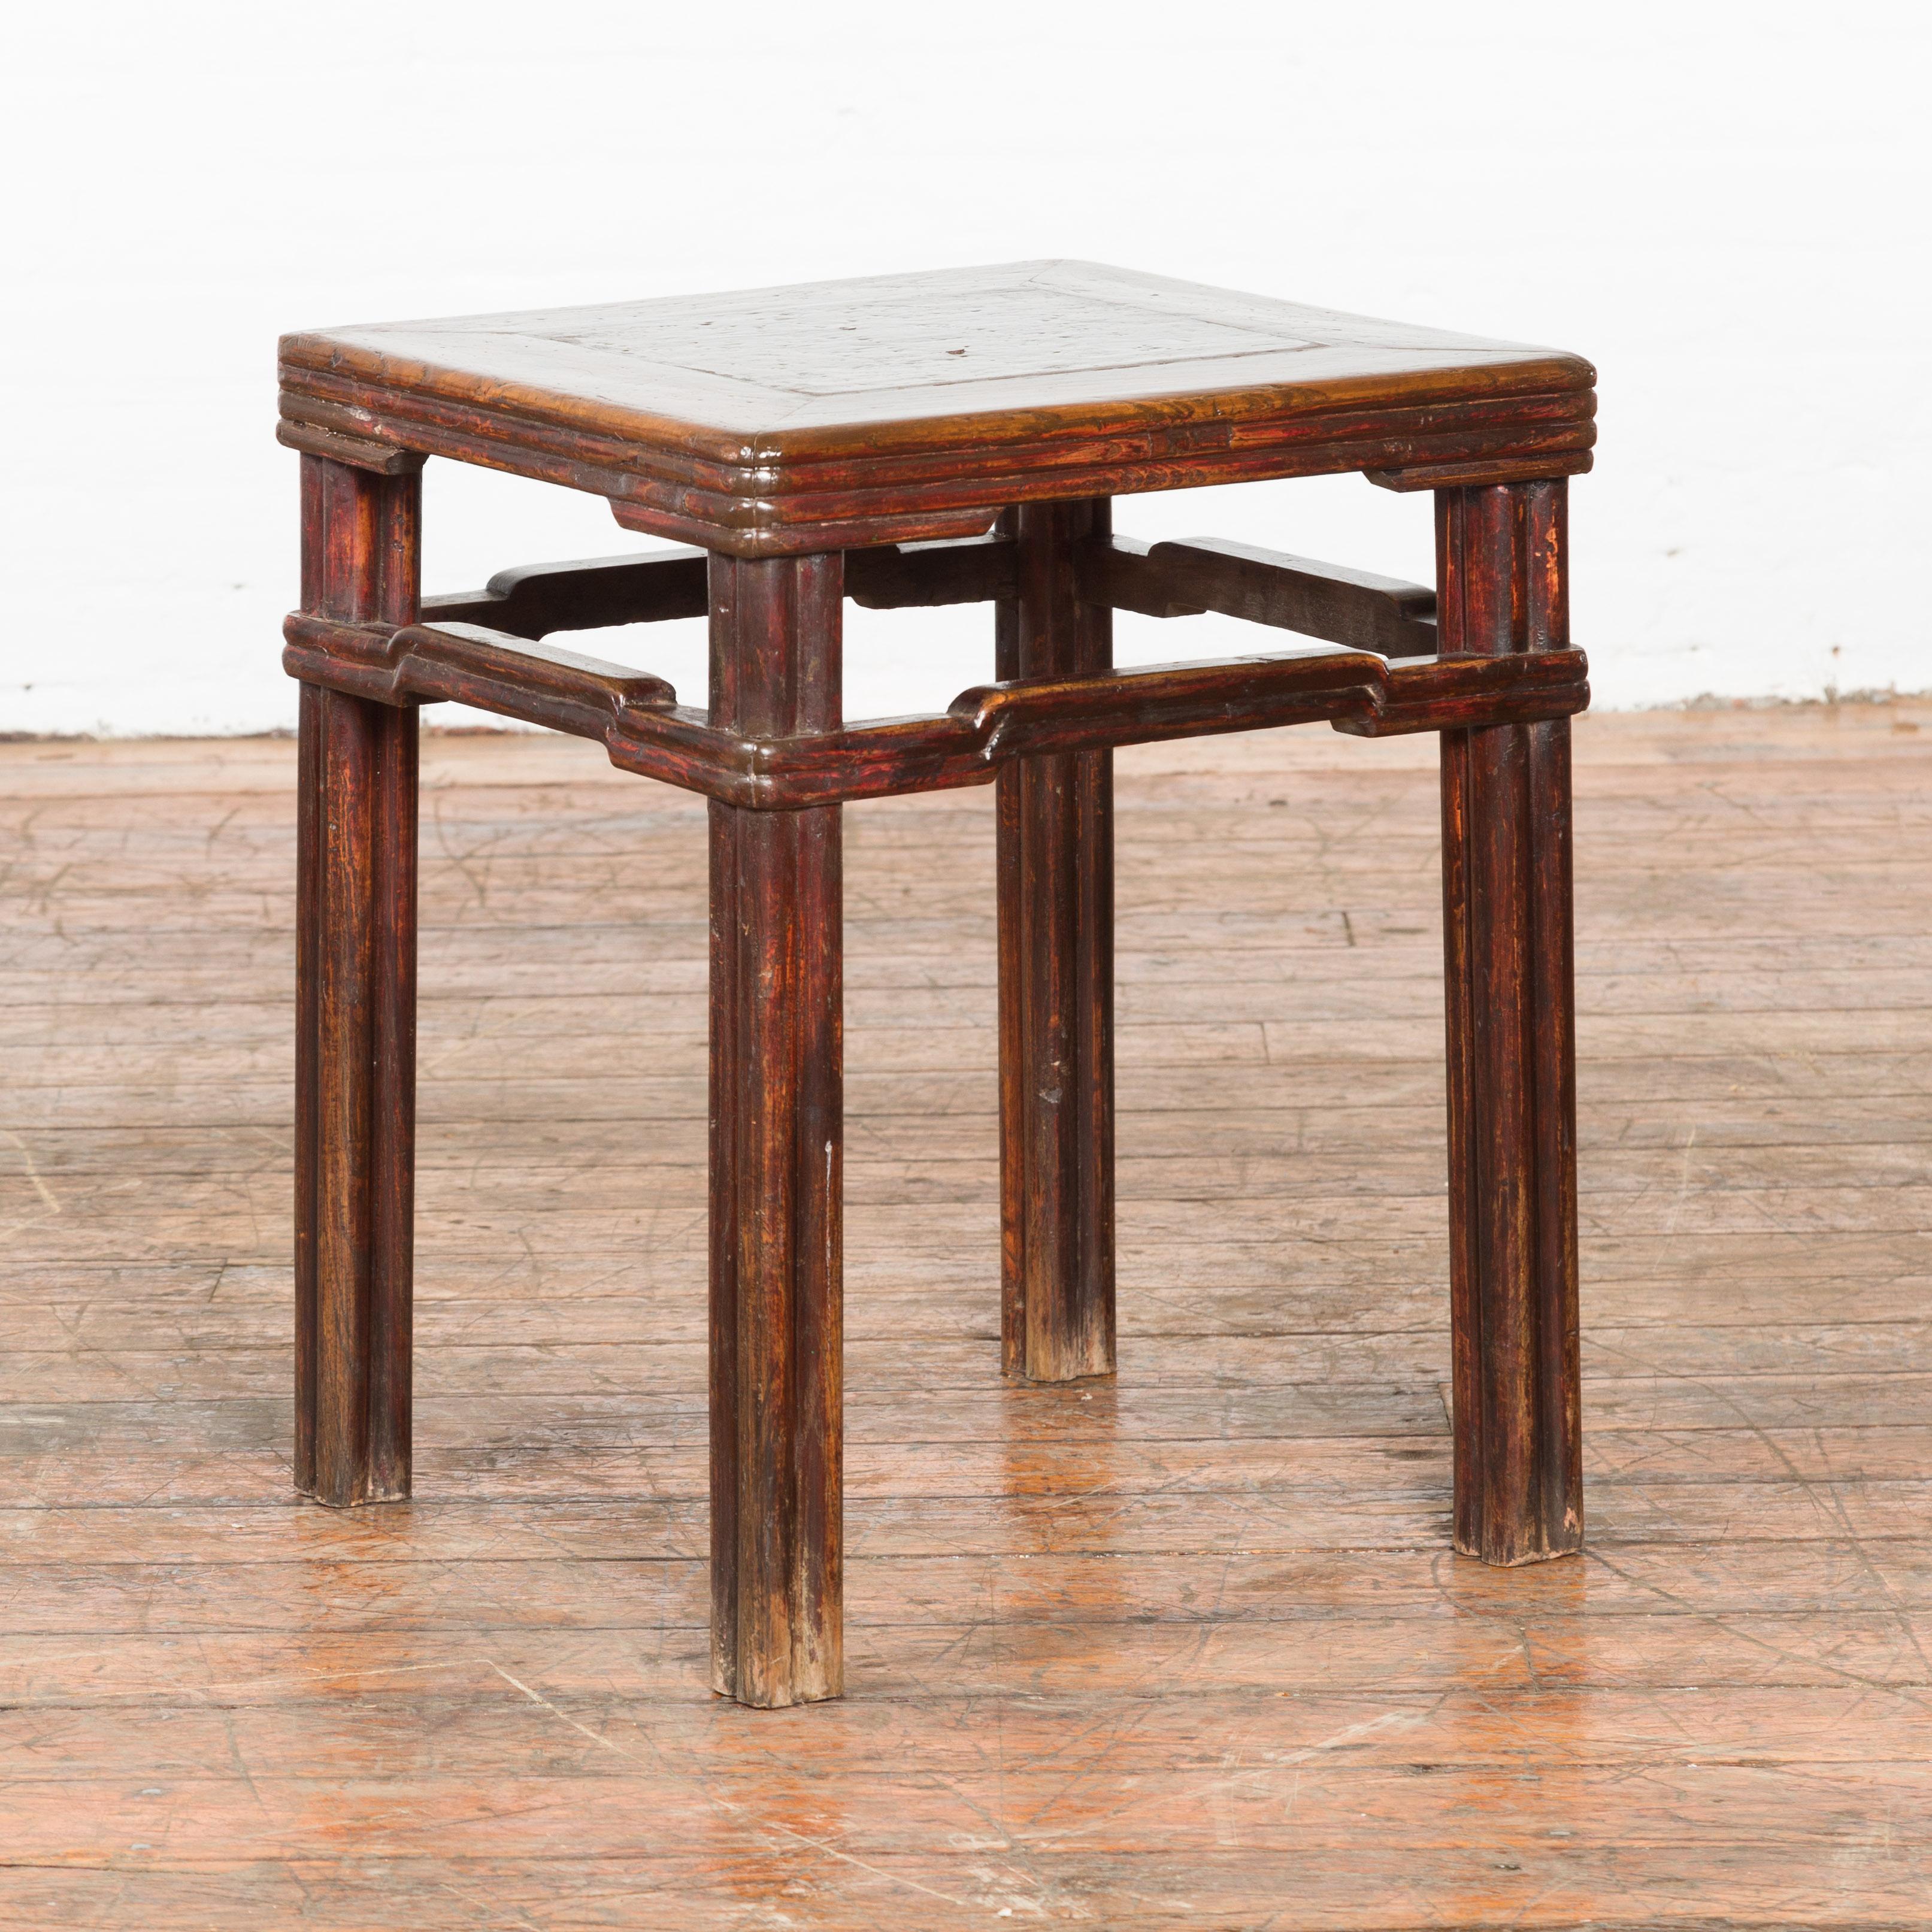 A Chinese Qing Dynasty period side table from the 19th century, with humpback stretchers and red undertone. Created in China during the Qing Dynasty, this side table features a square top with central board, sitting above a reeded apron. Raised on